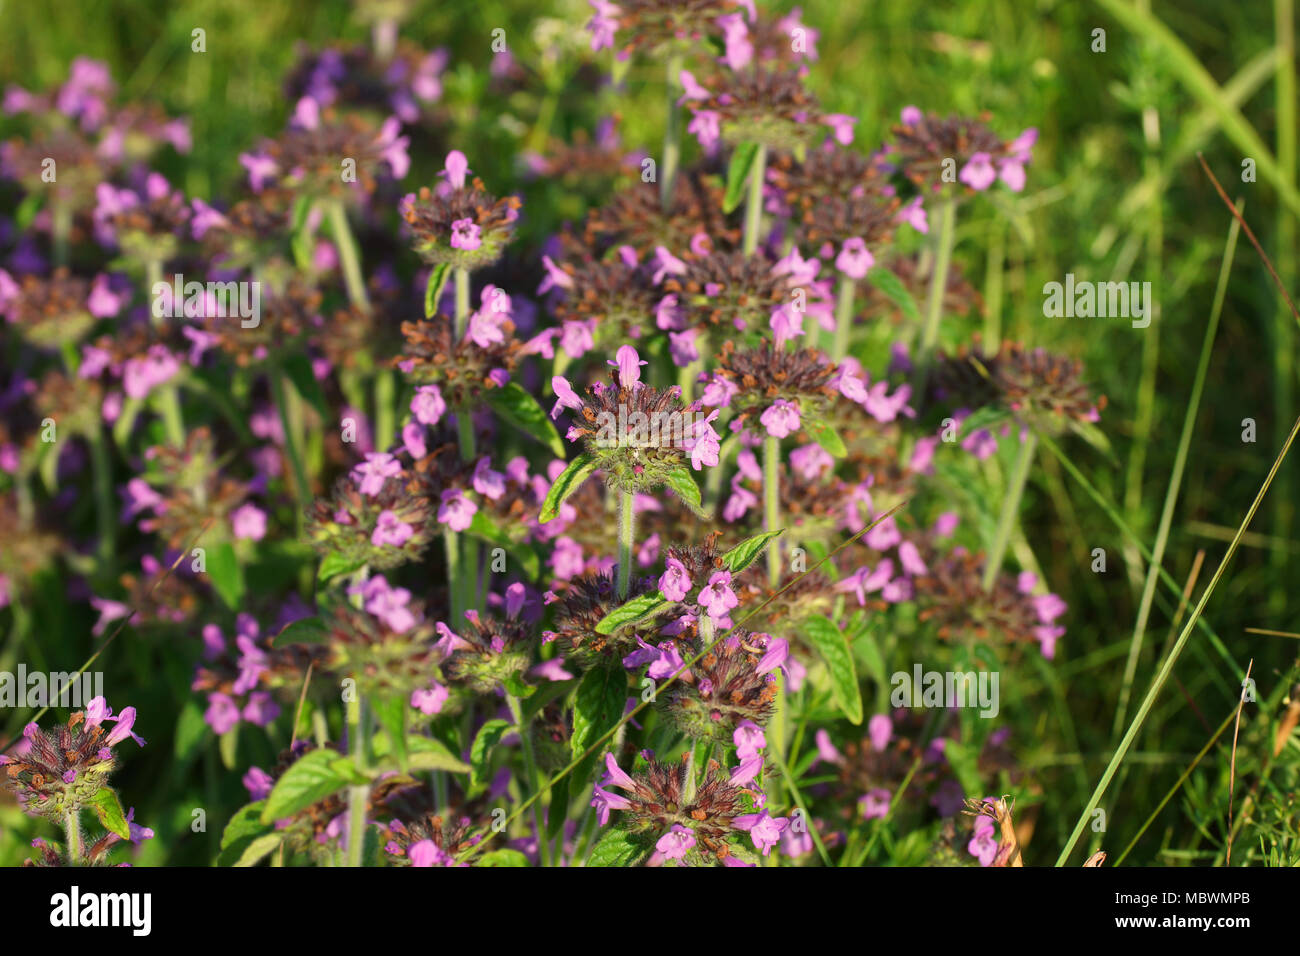 Wild basil grows in a meadow, lit by the warm rays of the setting sun. Clinopodium vulgare is common in the natural habitat. Stock Photo